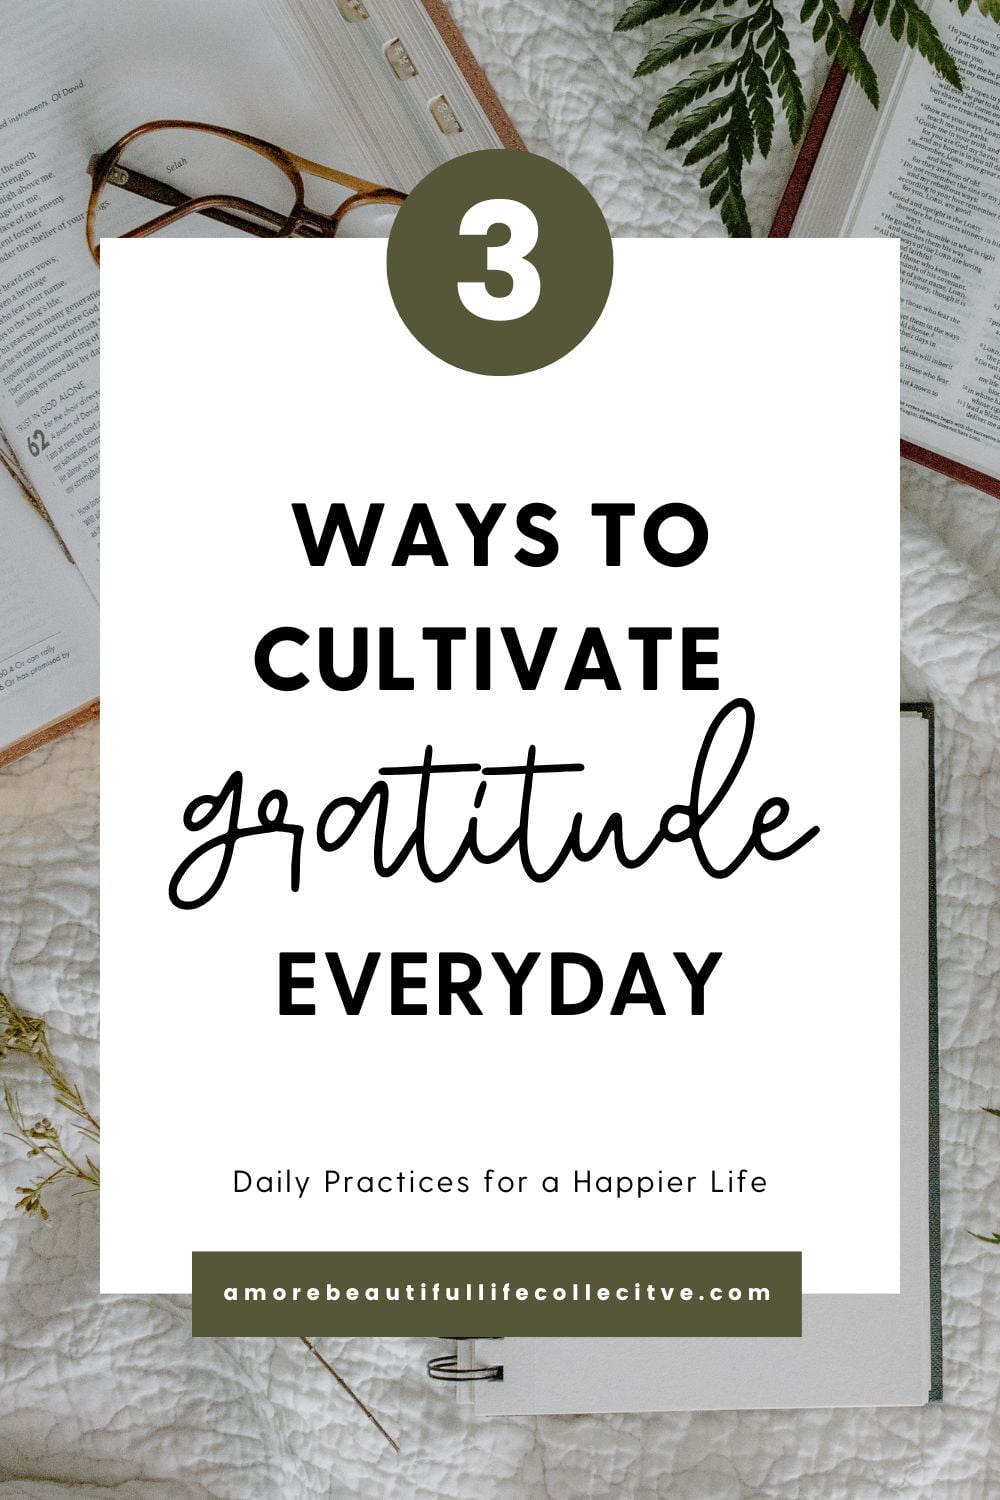 3 Ways to Cultivate Gratitude Everyday